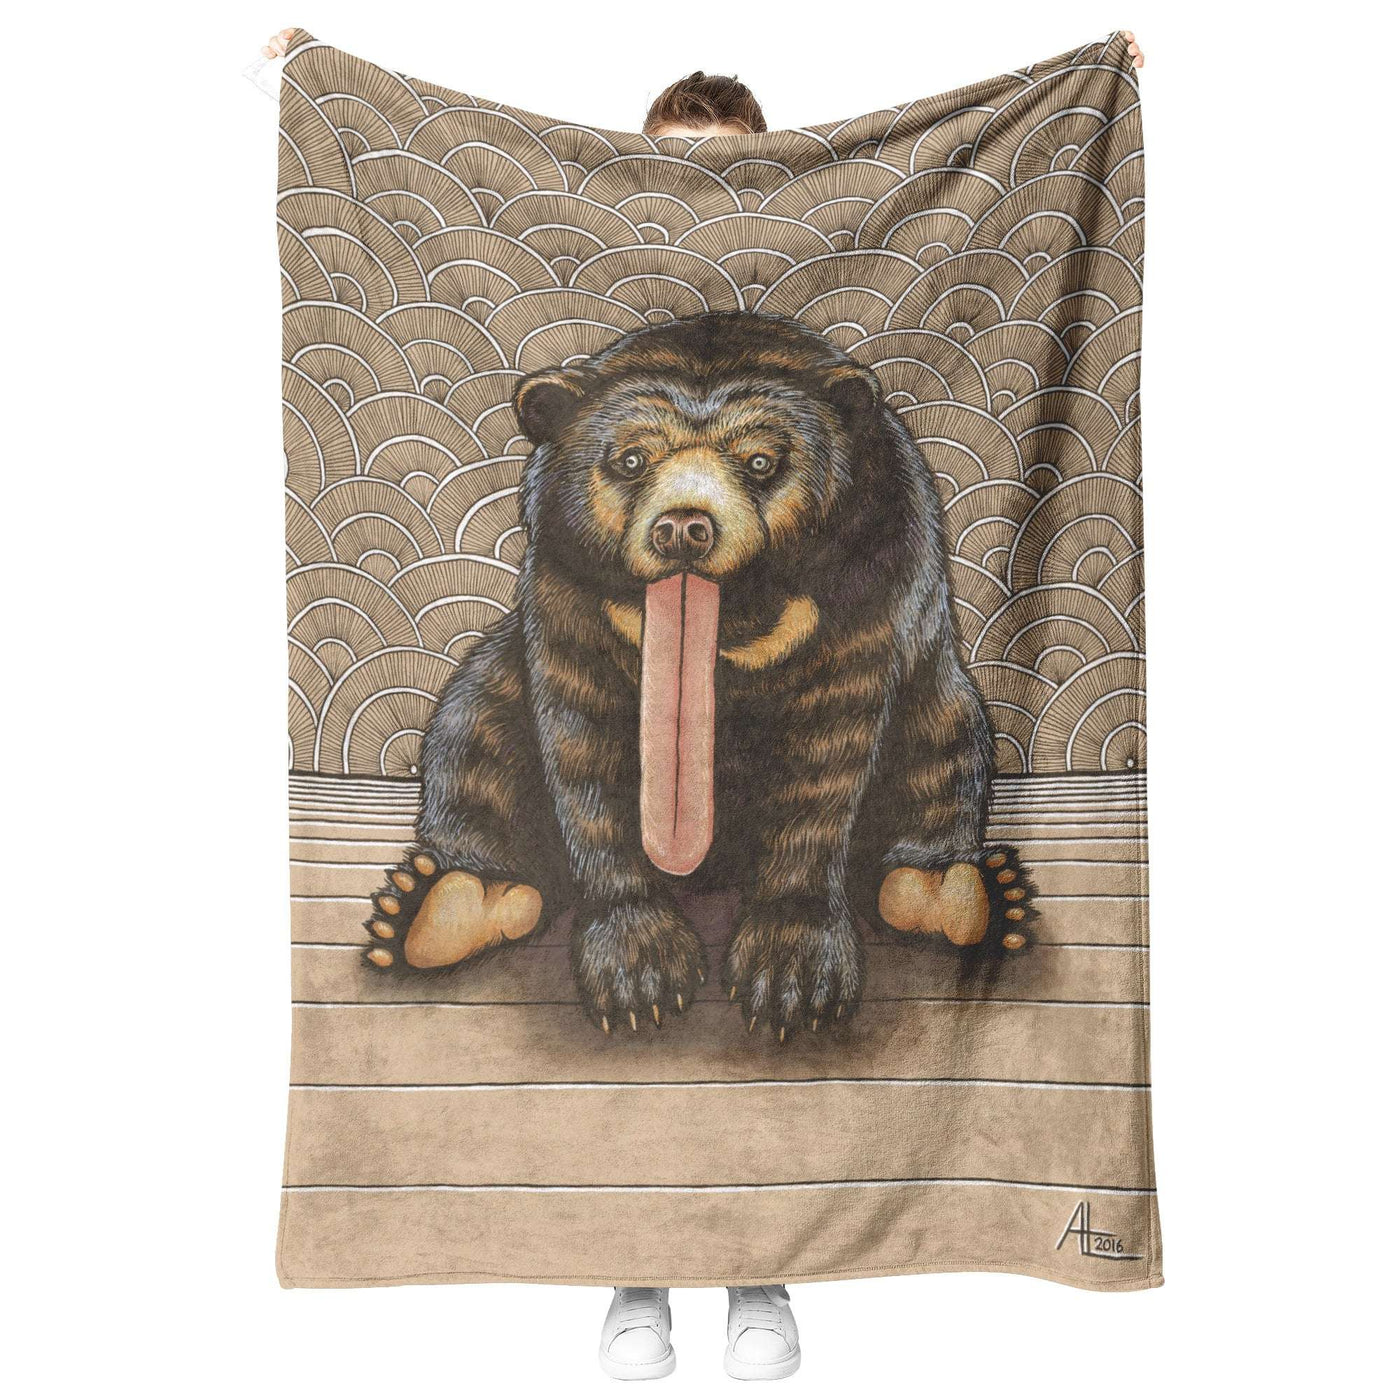 Person holding up a Sun Bear Blanket with a detailed illustration of a bear sitting, its tongue hanging out, in front of a wave-patterned background.